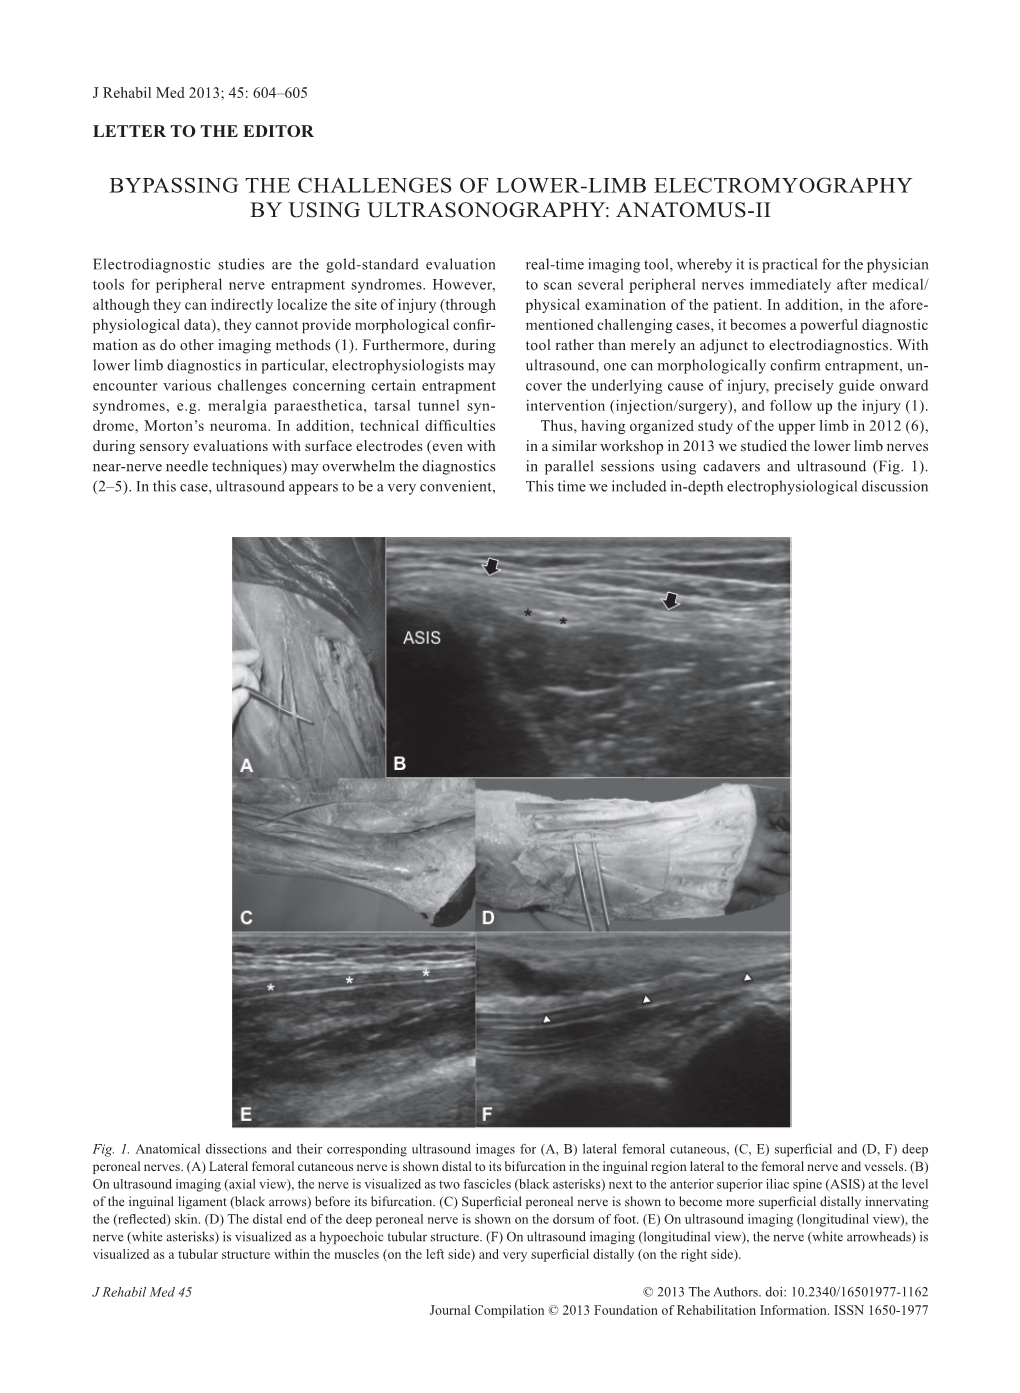 Bypassing the Challenges of Lower-Limb ELECTROMYOGRAPHY by Using Ultrasonography: Anatomus-II